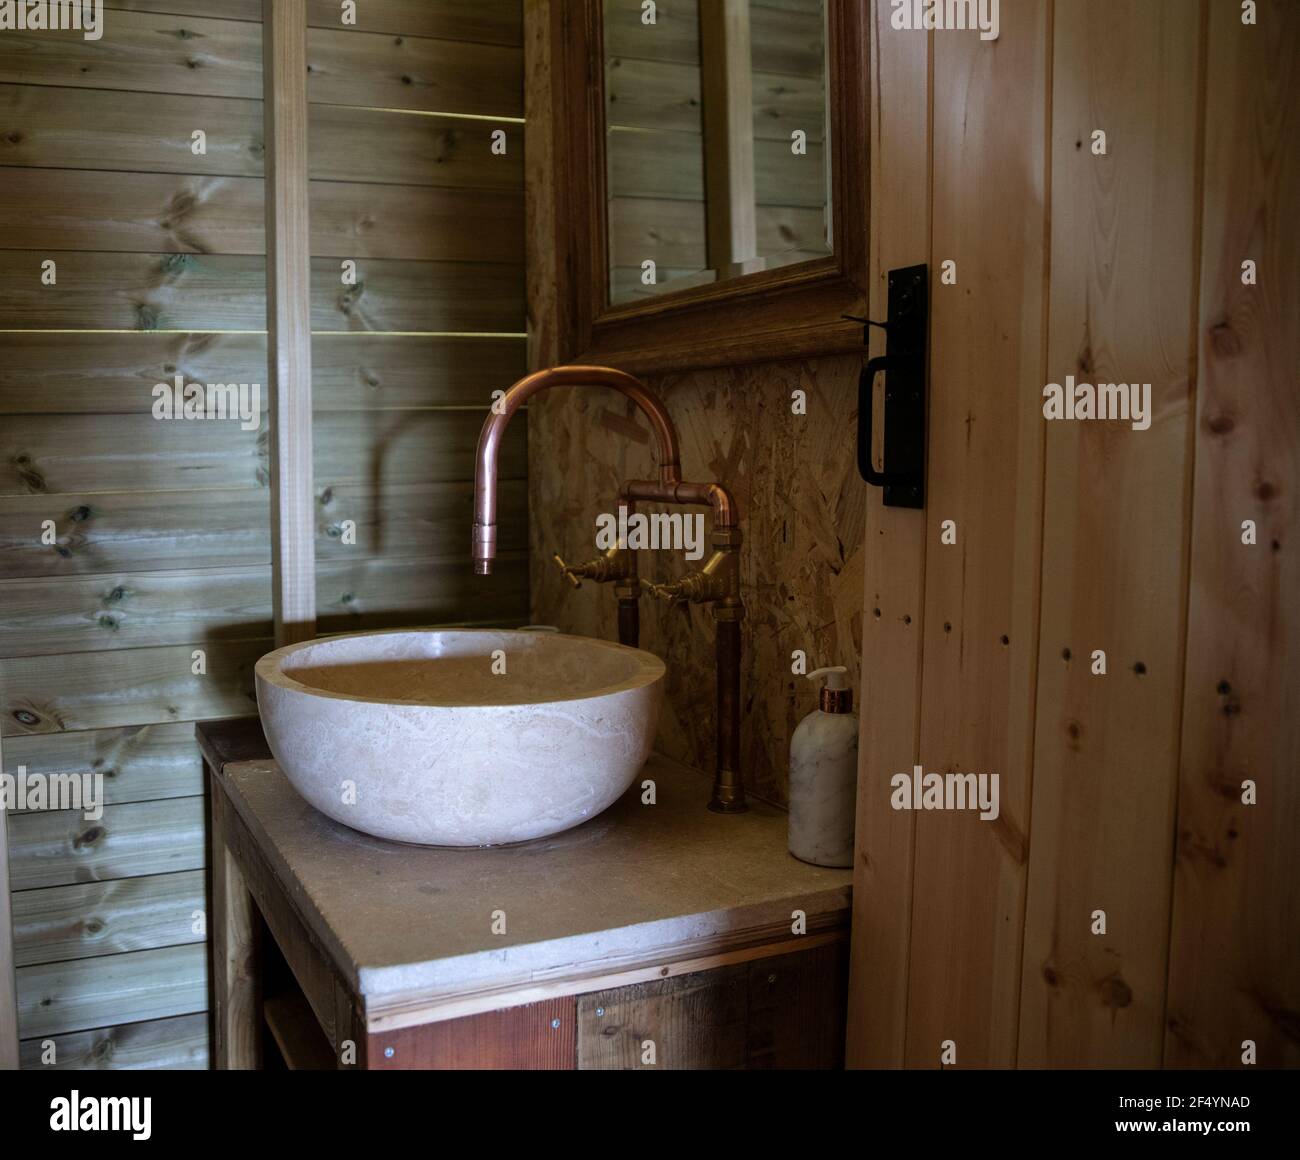 Bowl sink and copper faucet in cabin bathroom Stock Photo